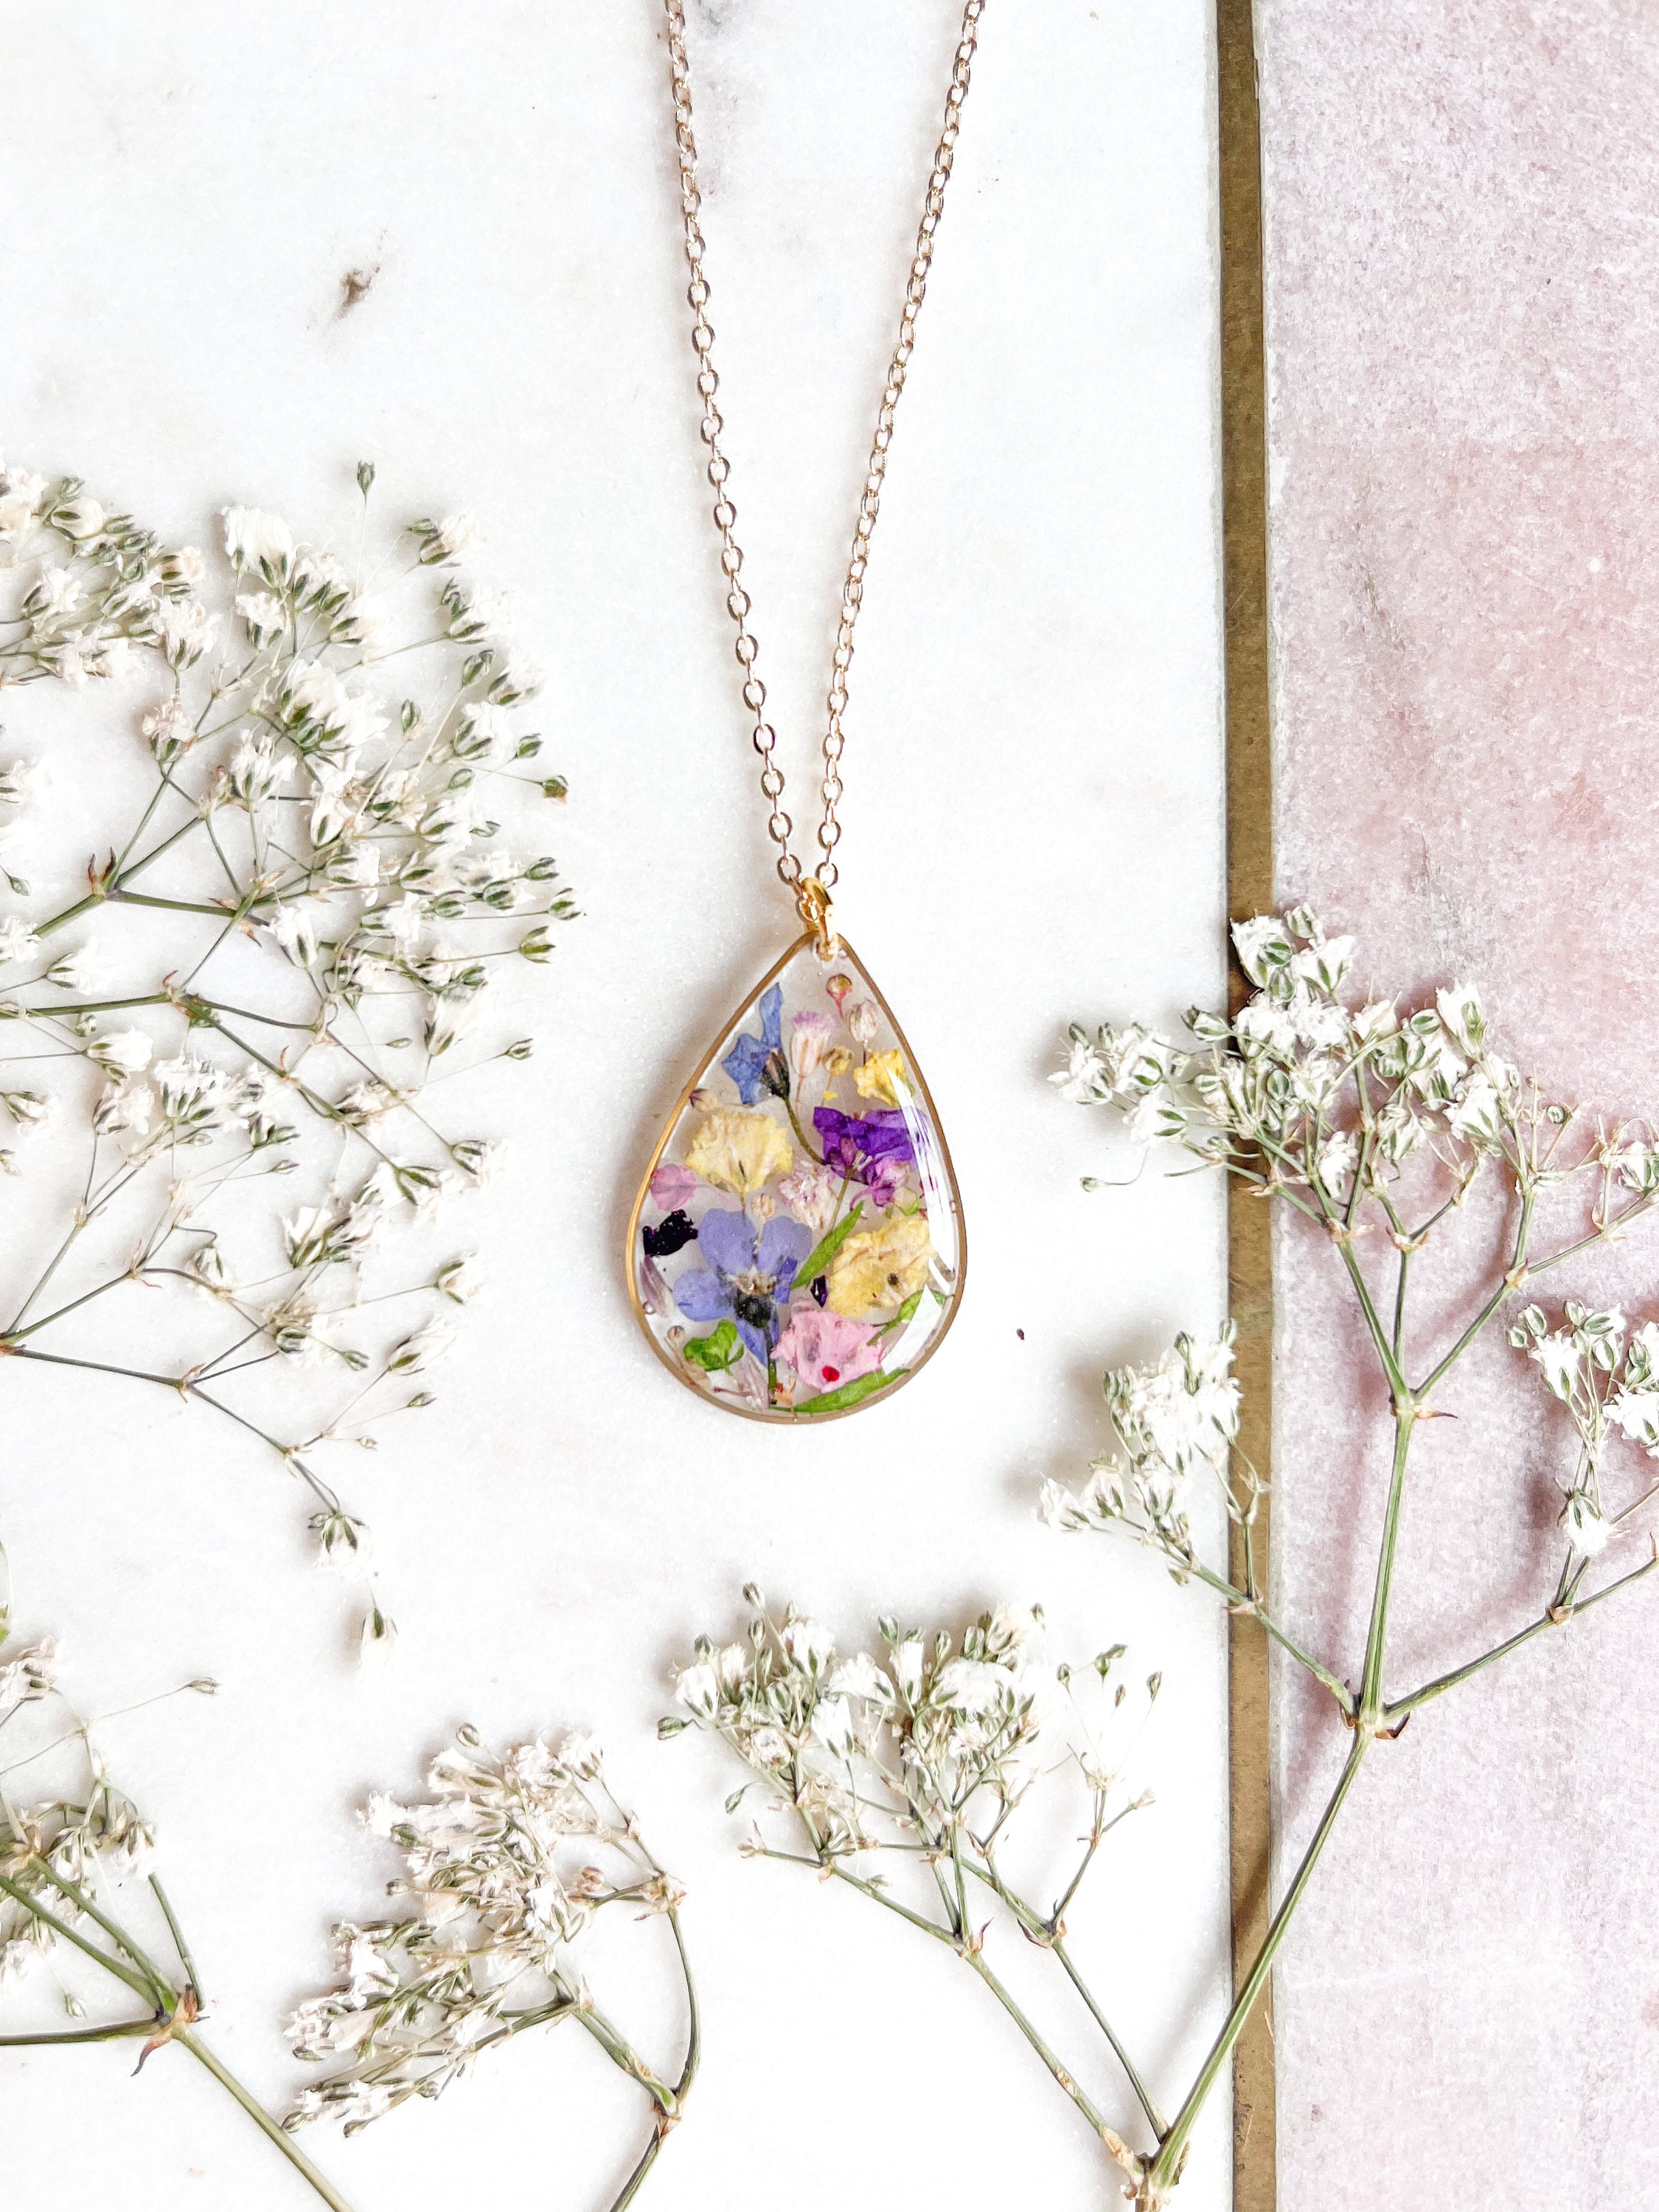 Pressed Wild Flower Pendant Necklace On 22K Gold Plated Fine Chain/Boho Chic Pressed Flowers Jewellery Floral